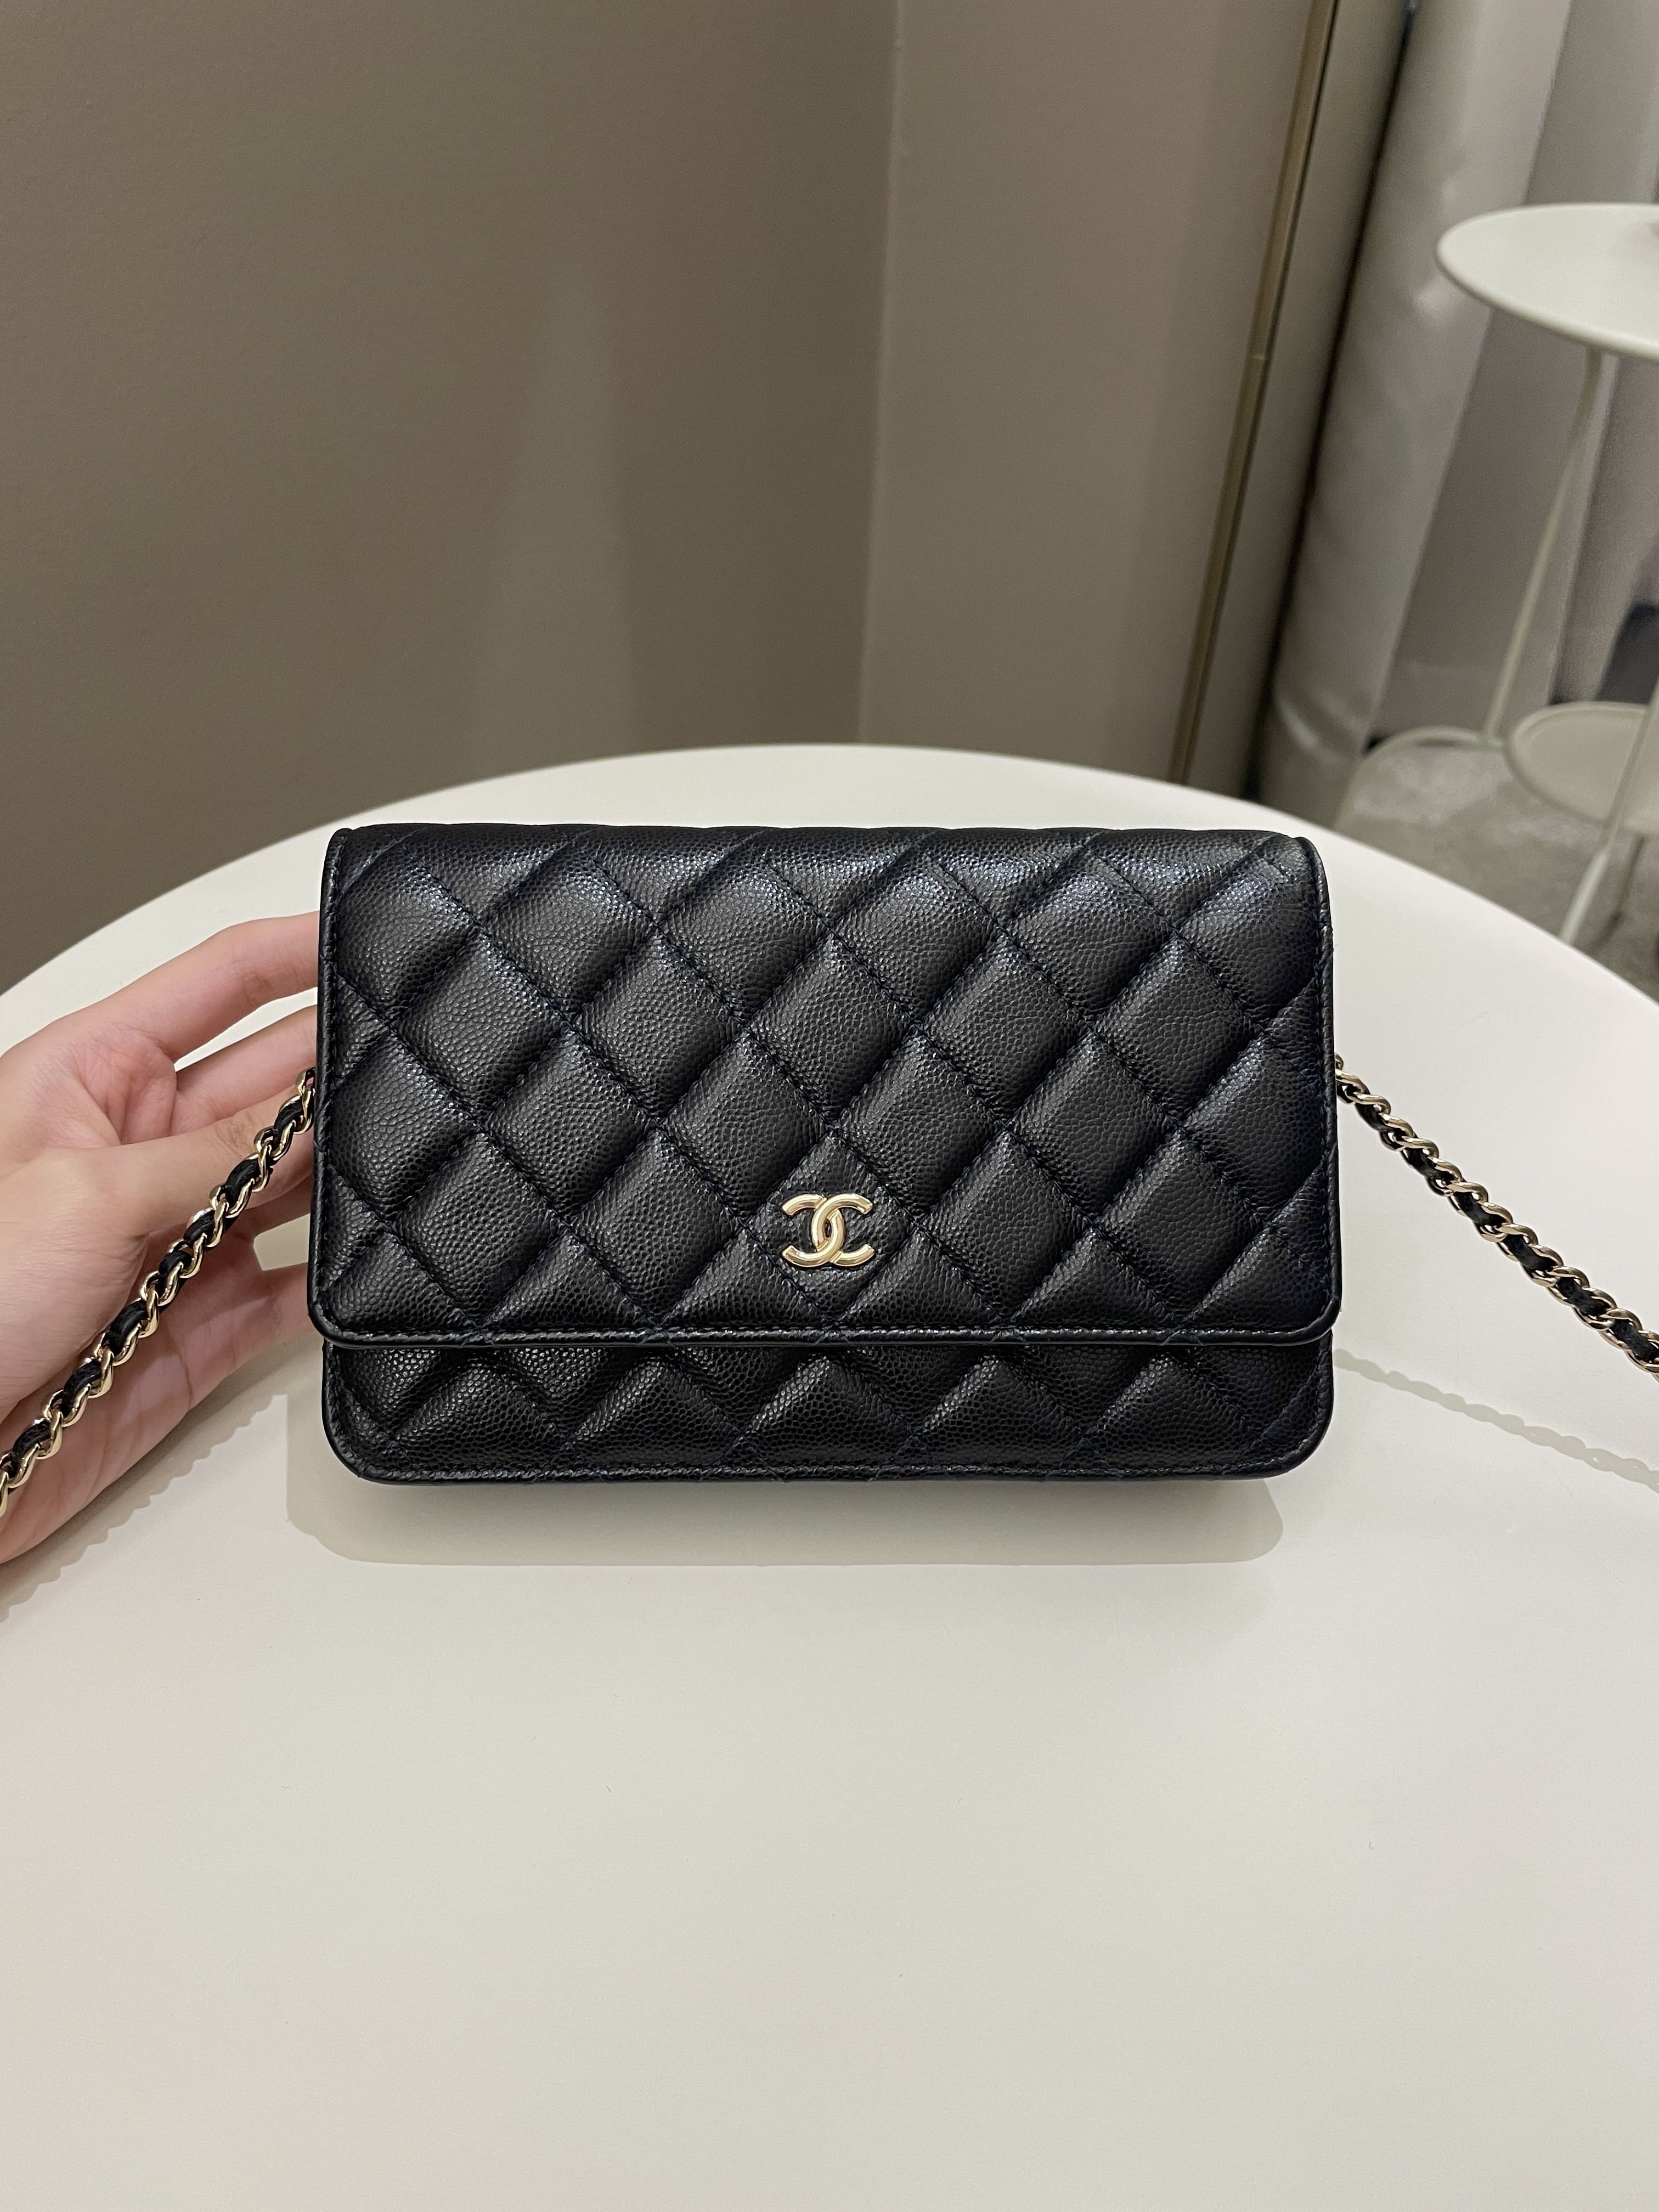 chanel classic flap bag outfit